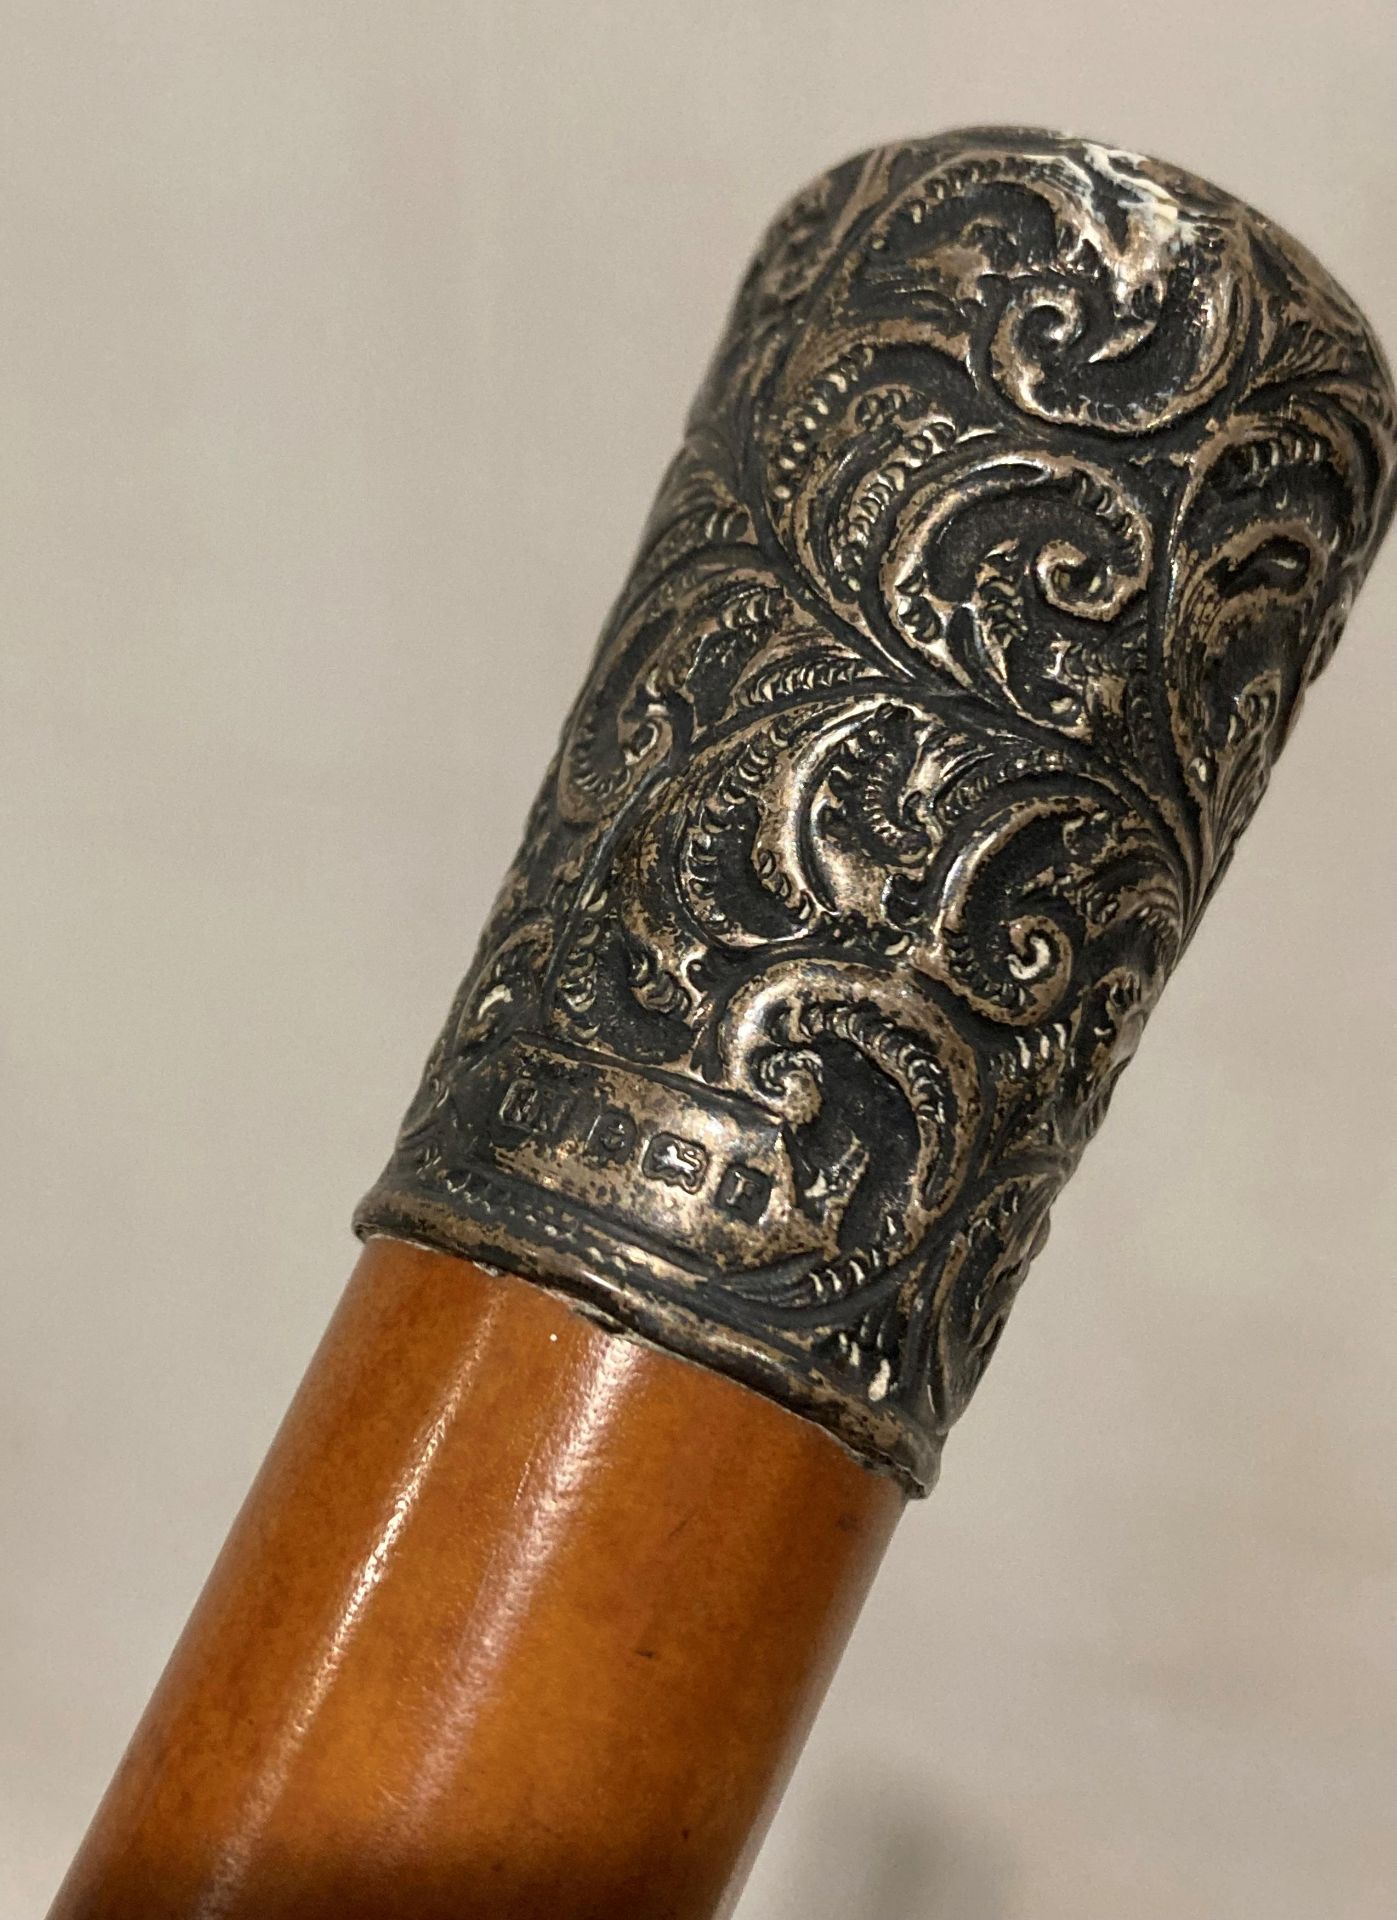 Silver mounted wooden walking stick (86. - Image 3 of 3